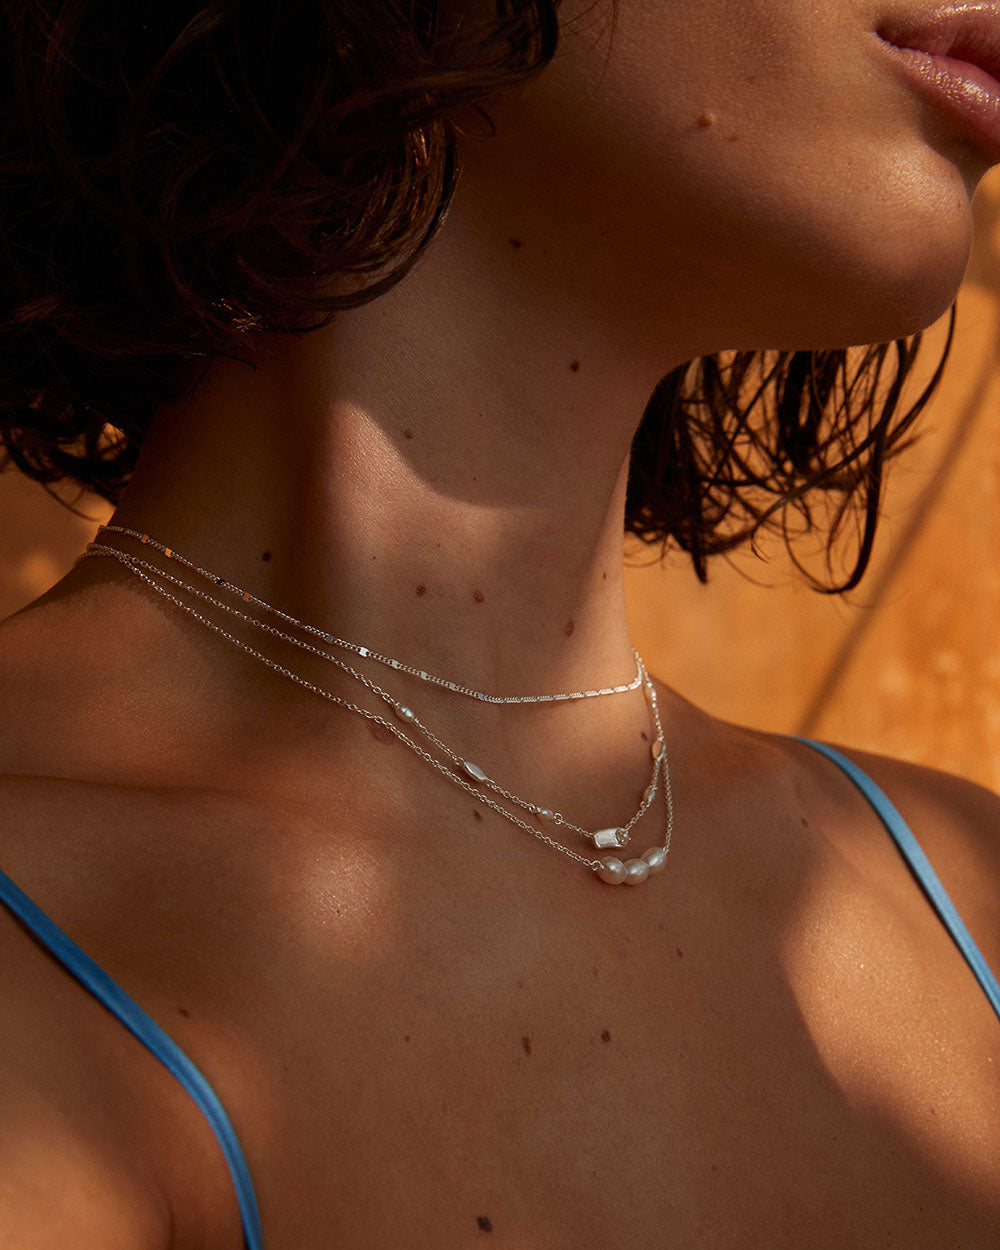 VACANZA NECKLACE (STERLING SILVER)